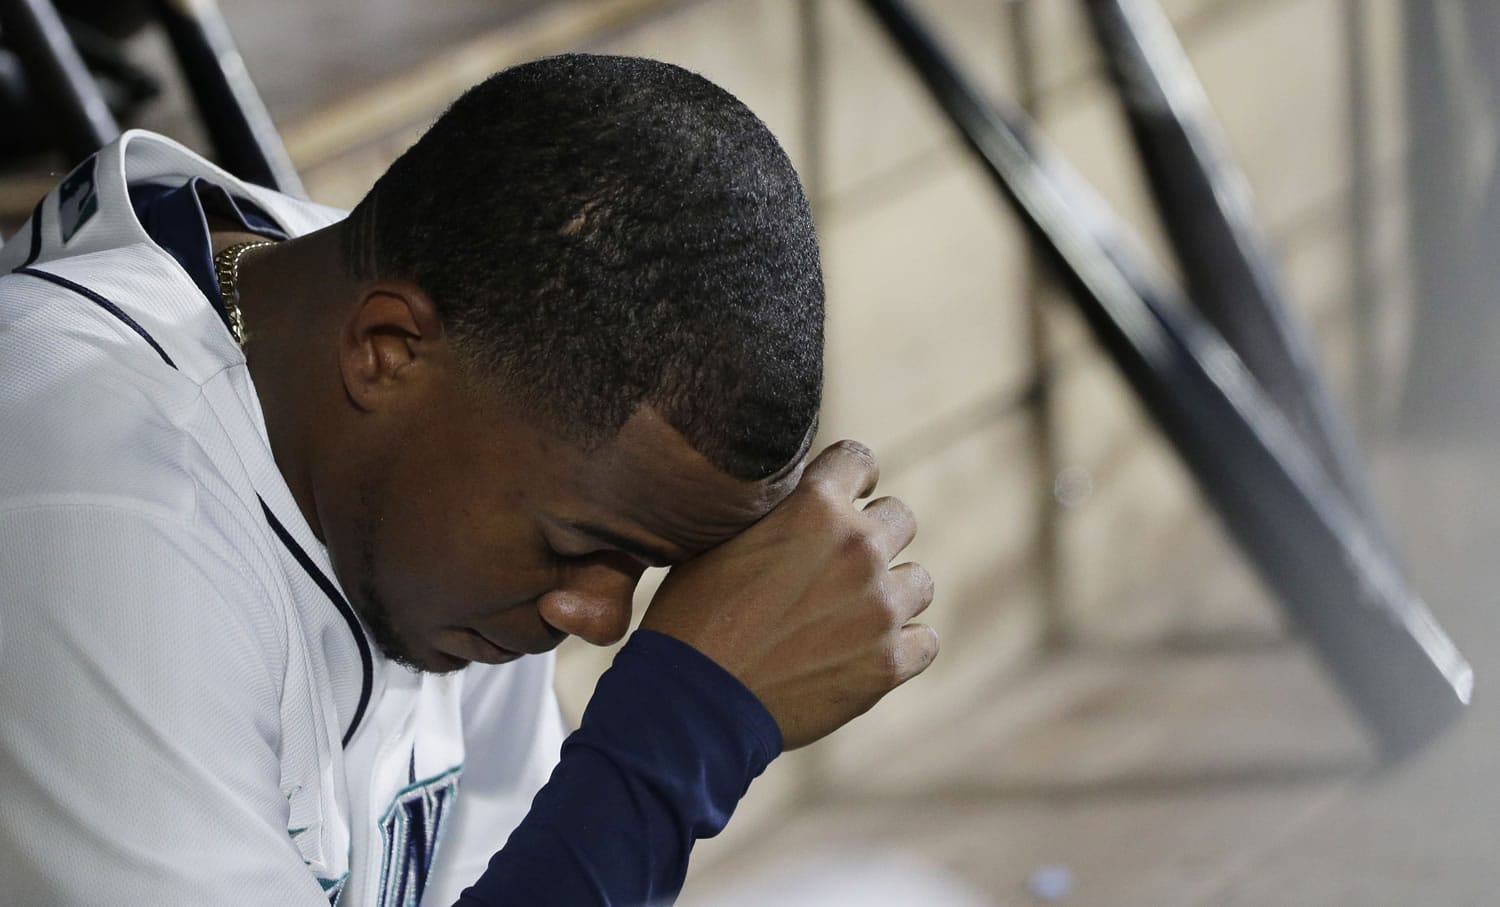 Seattle Mariners starting pitcher Roenis Elias sits in the dugout after being pulled from a baseball game against the Oakland Athletics in the third inning, Saturday, Oct. 3, 2015, in Seattle. (AP Photo/Ted S.